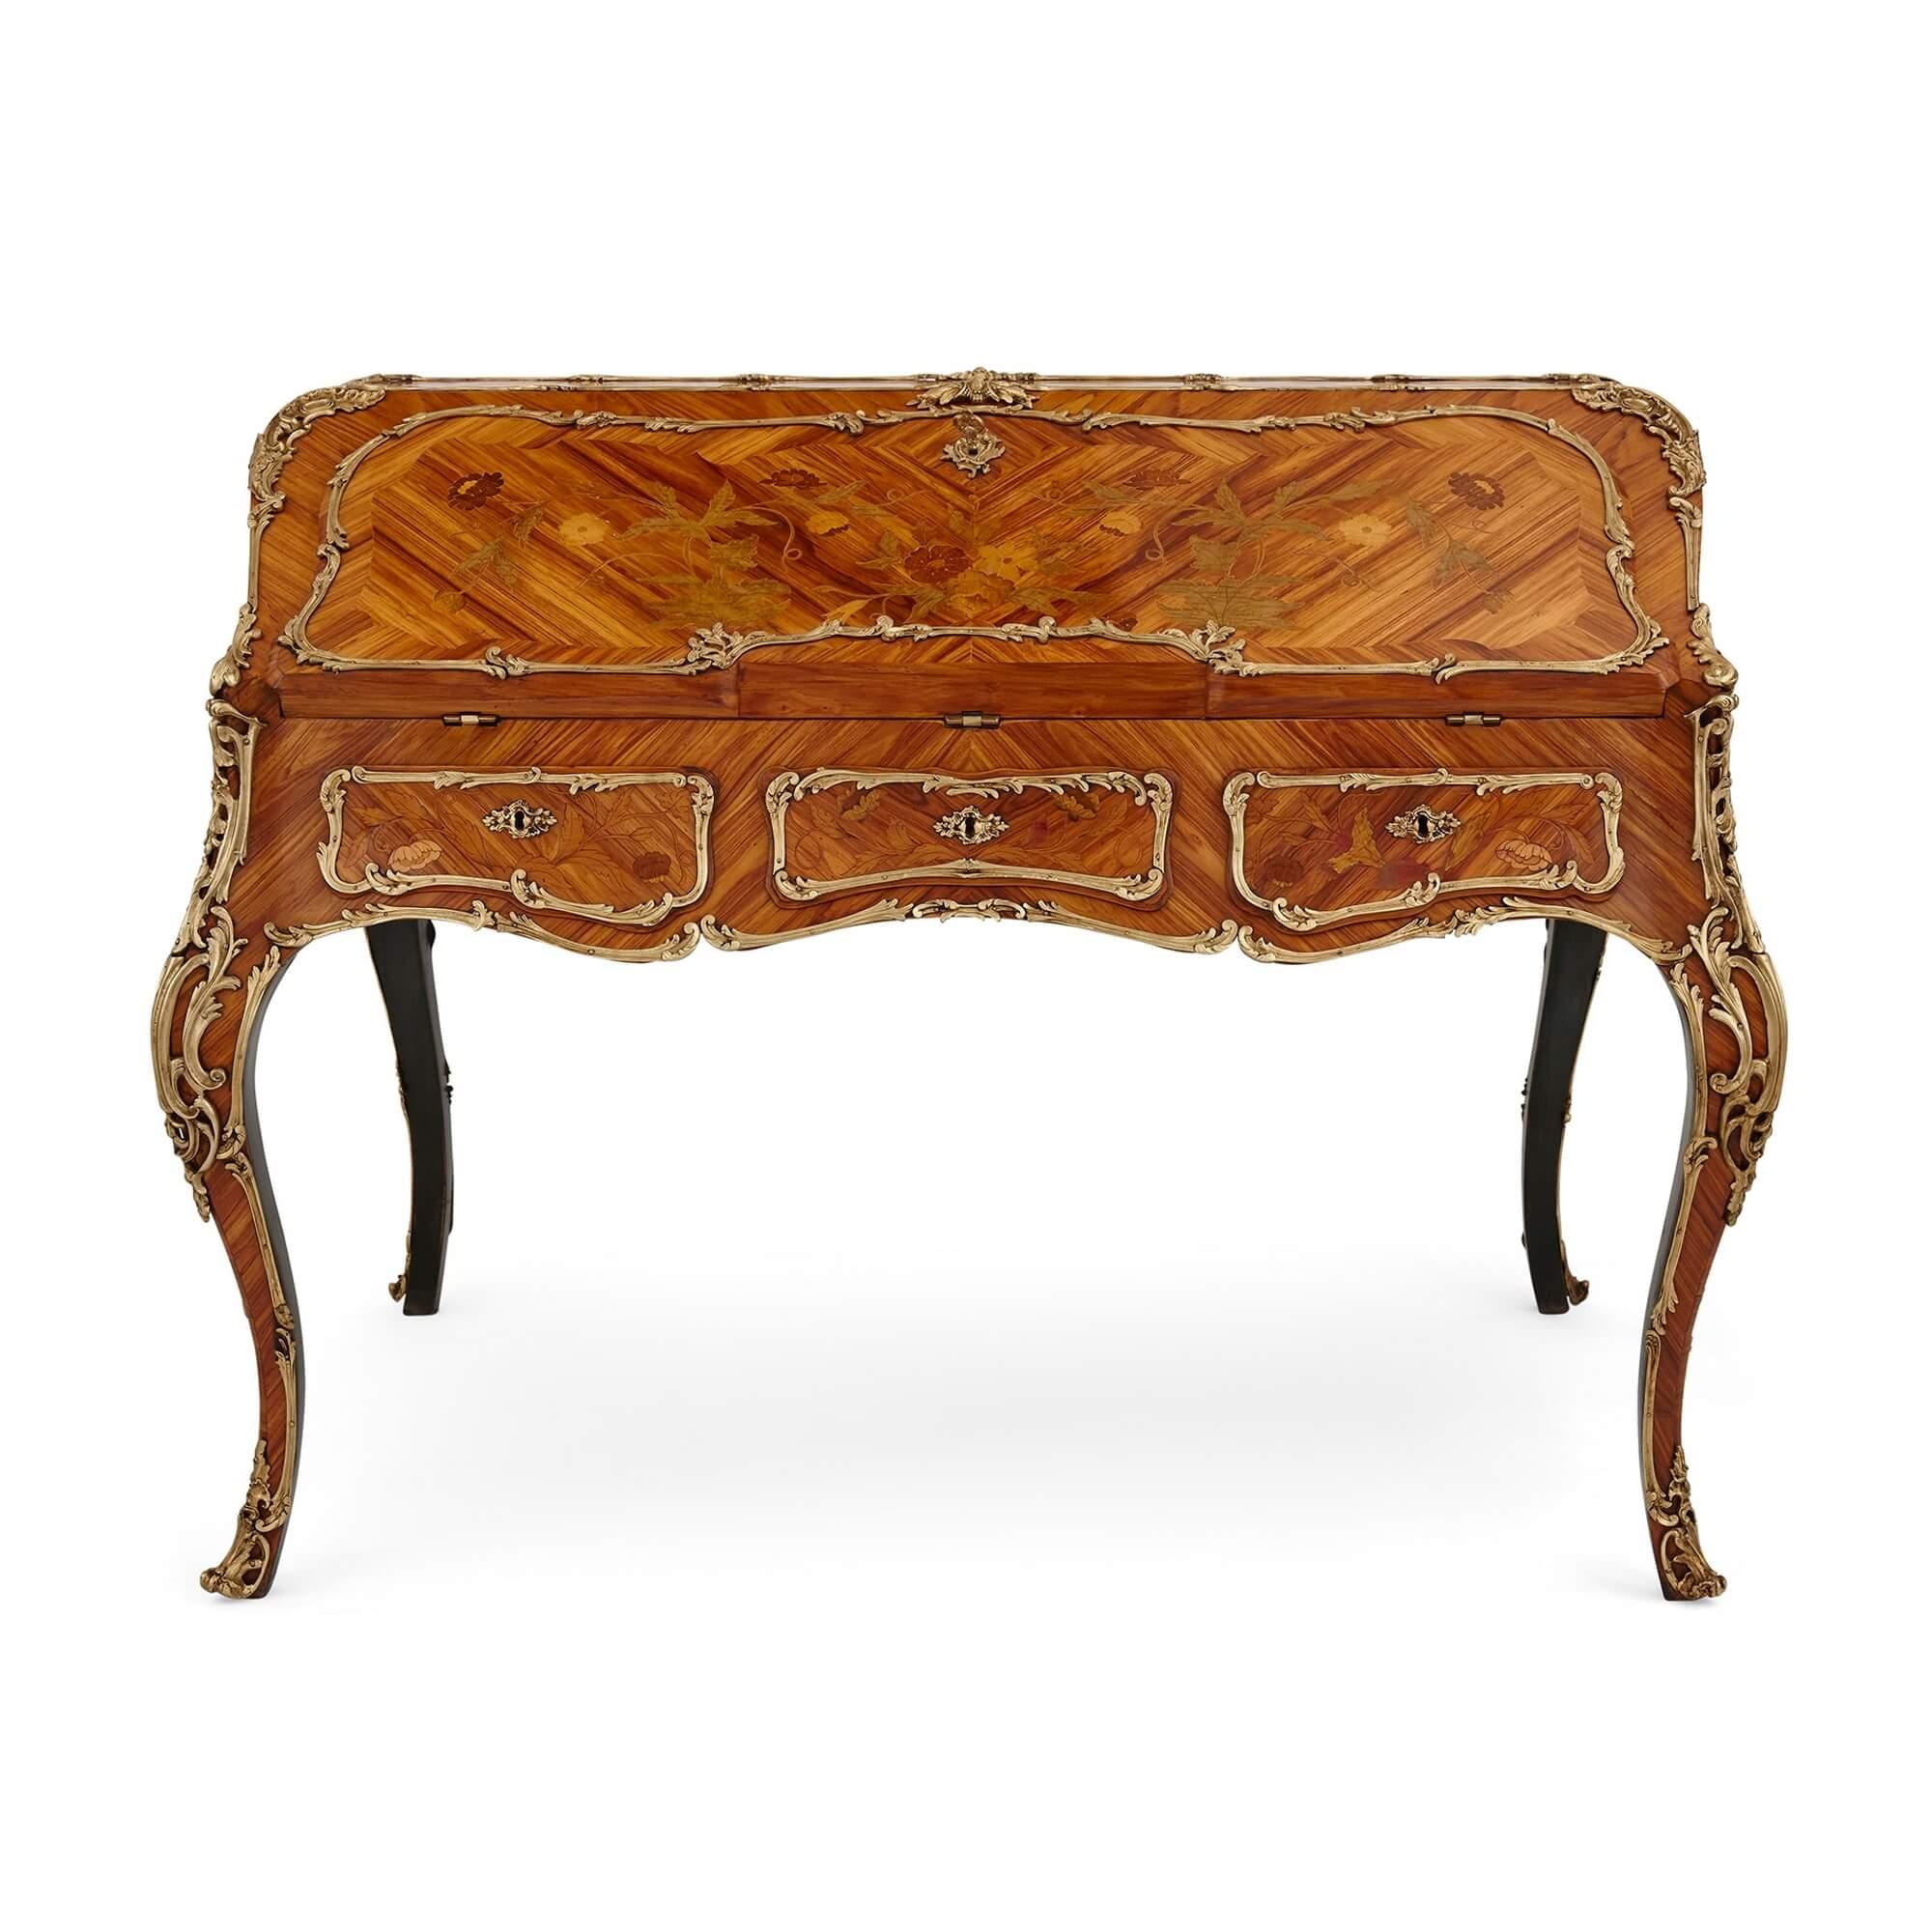 Unusual Transition style marquetry and gilt bronze double sided writing desk
French, early 20th Century
Height 98cm, width 130cm, depth 94cm

This rare doubled-sided writing desk is a superb piece of nineteenth-century French decorative art,